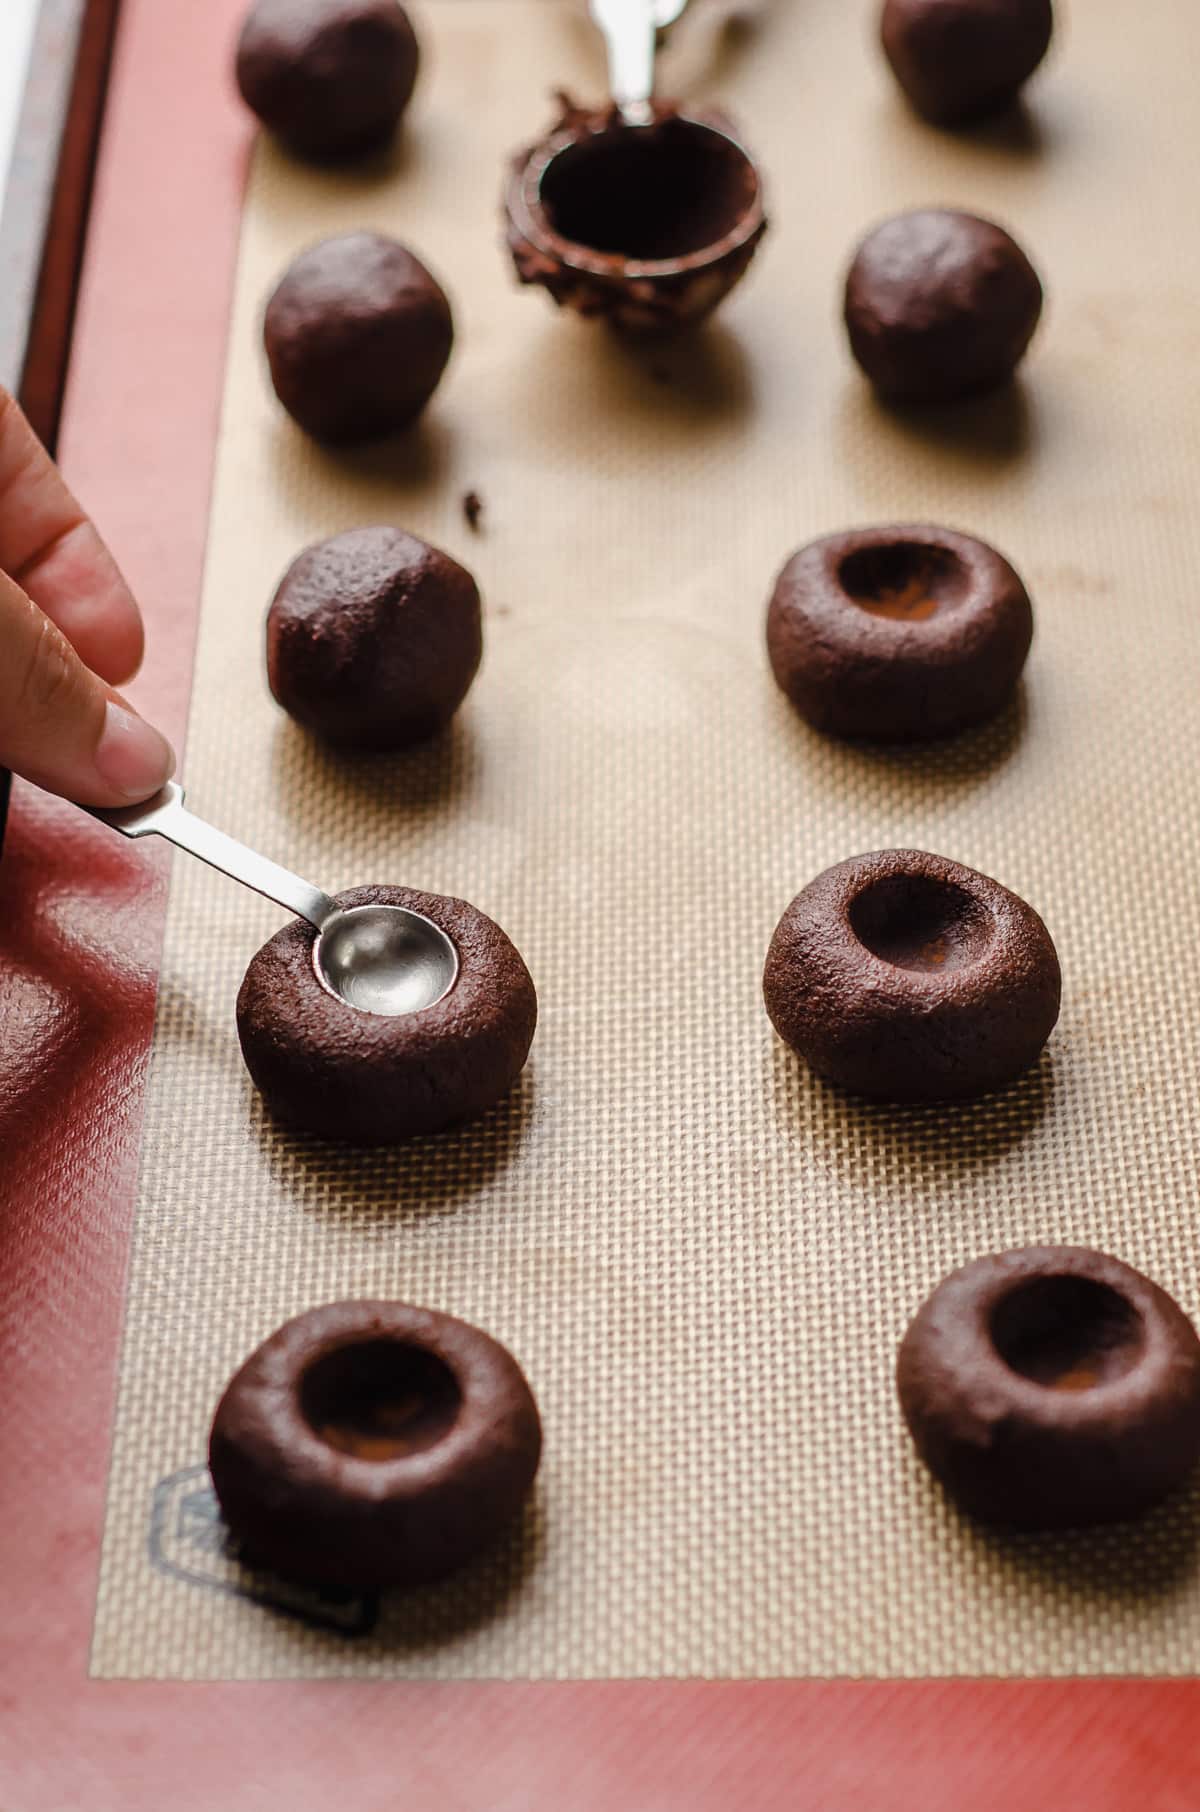 pressing a measuring spoon into chocolate cookie dough balls to make thumbprints